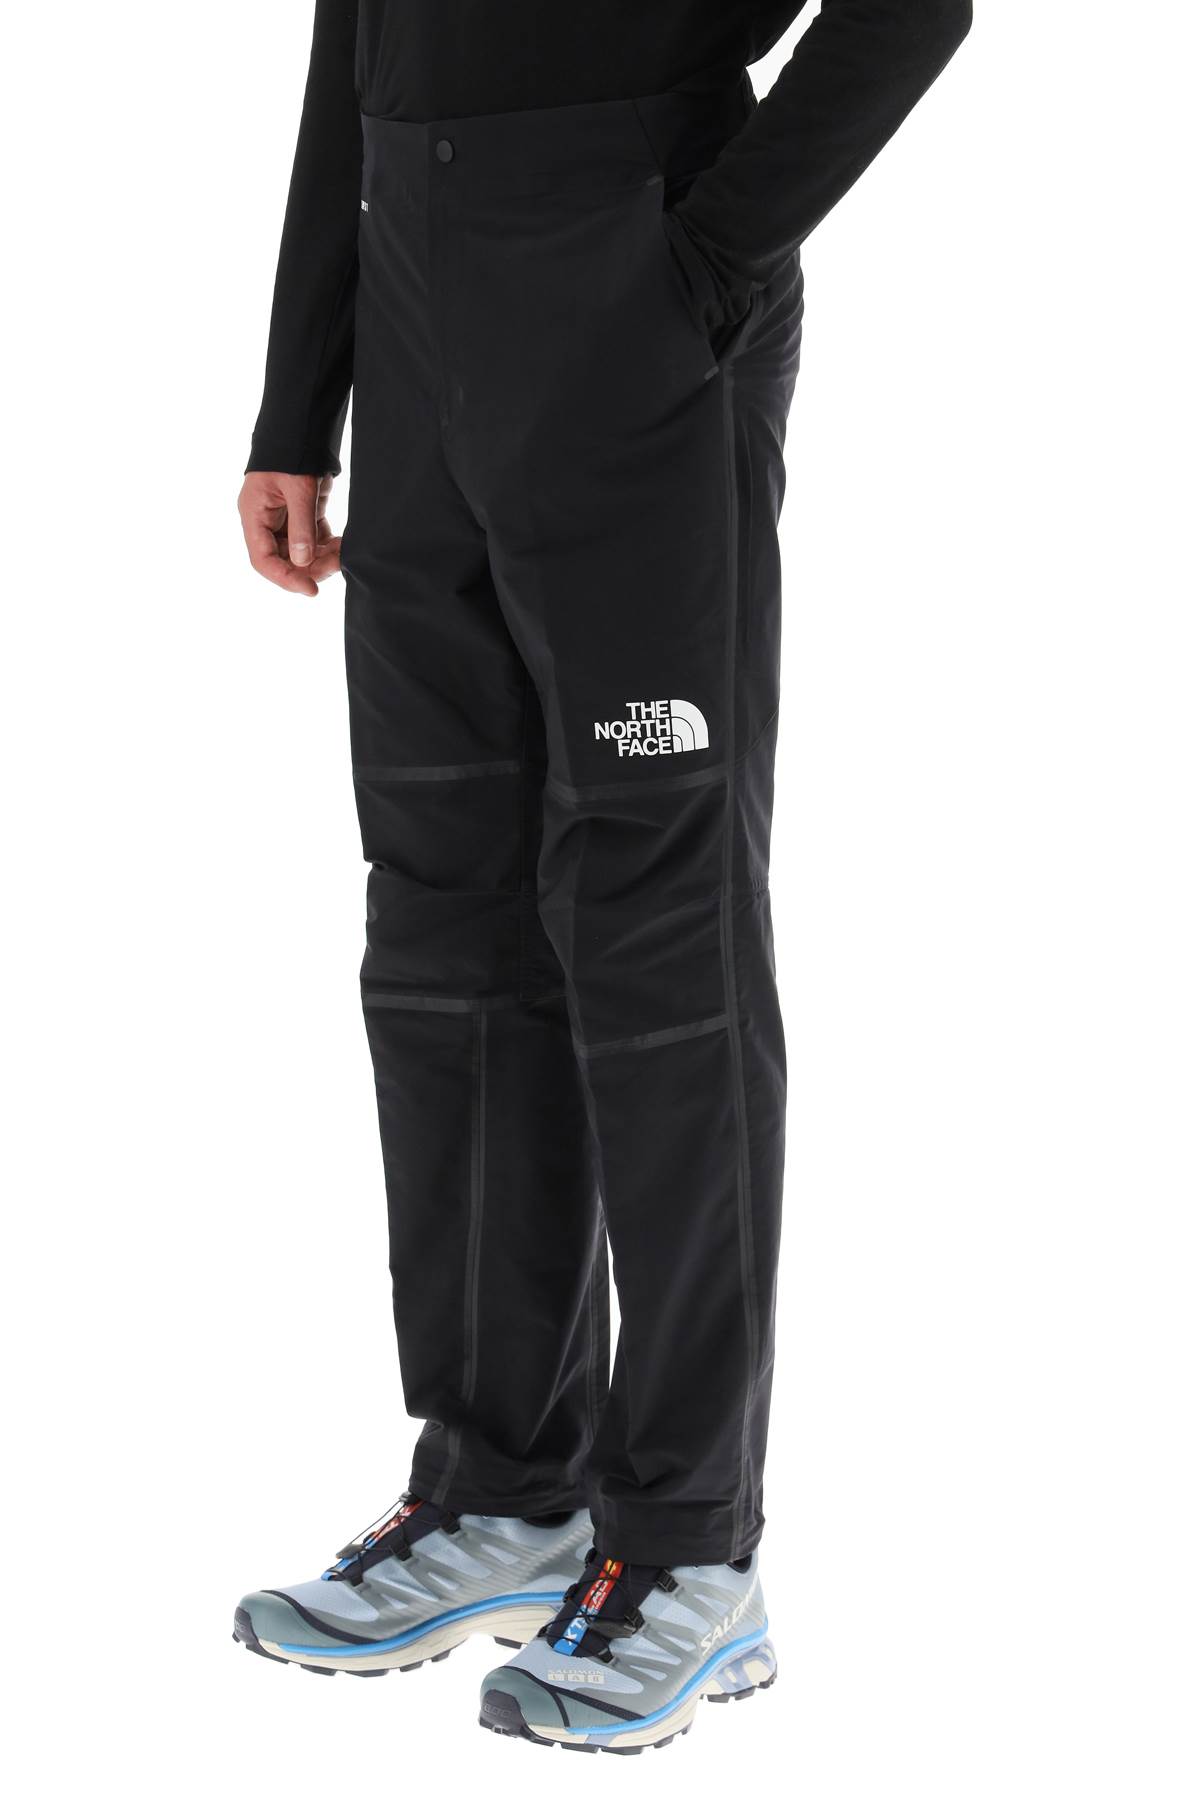 The North Face RMST MOUNTAIN PANT Black  BSTN Store